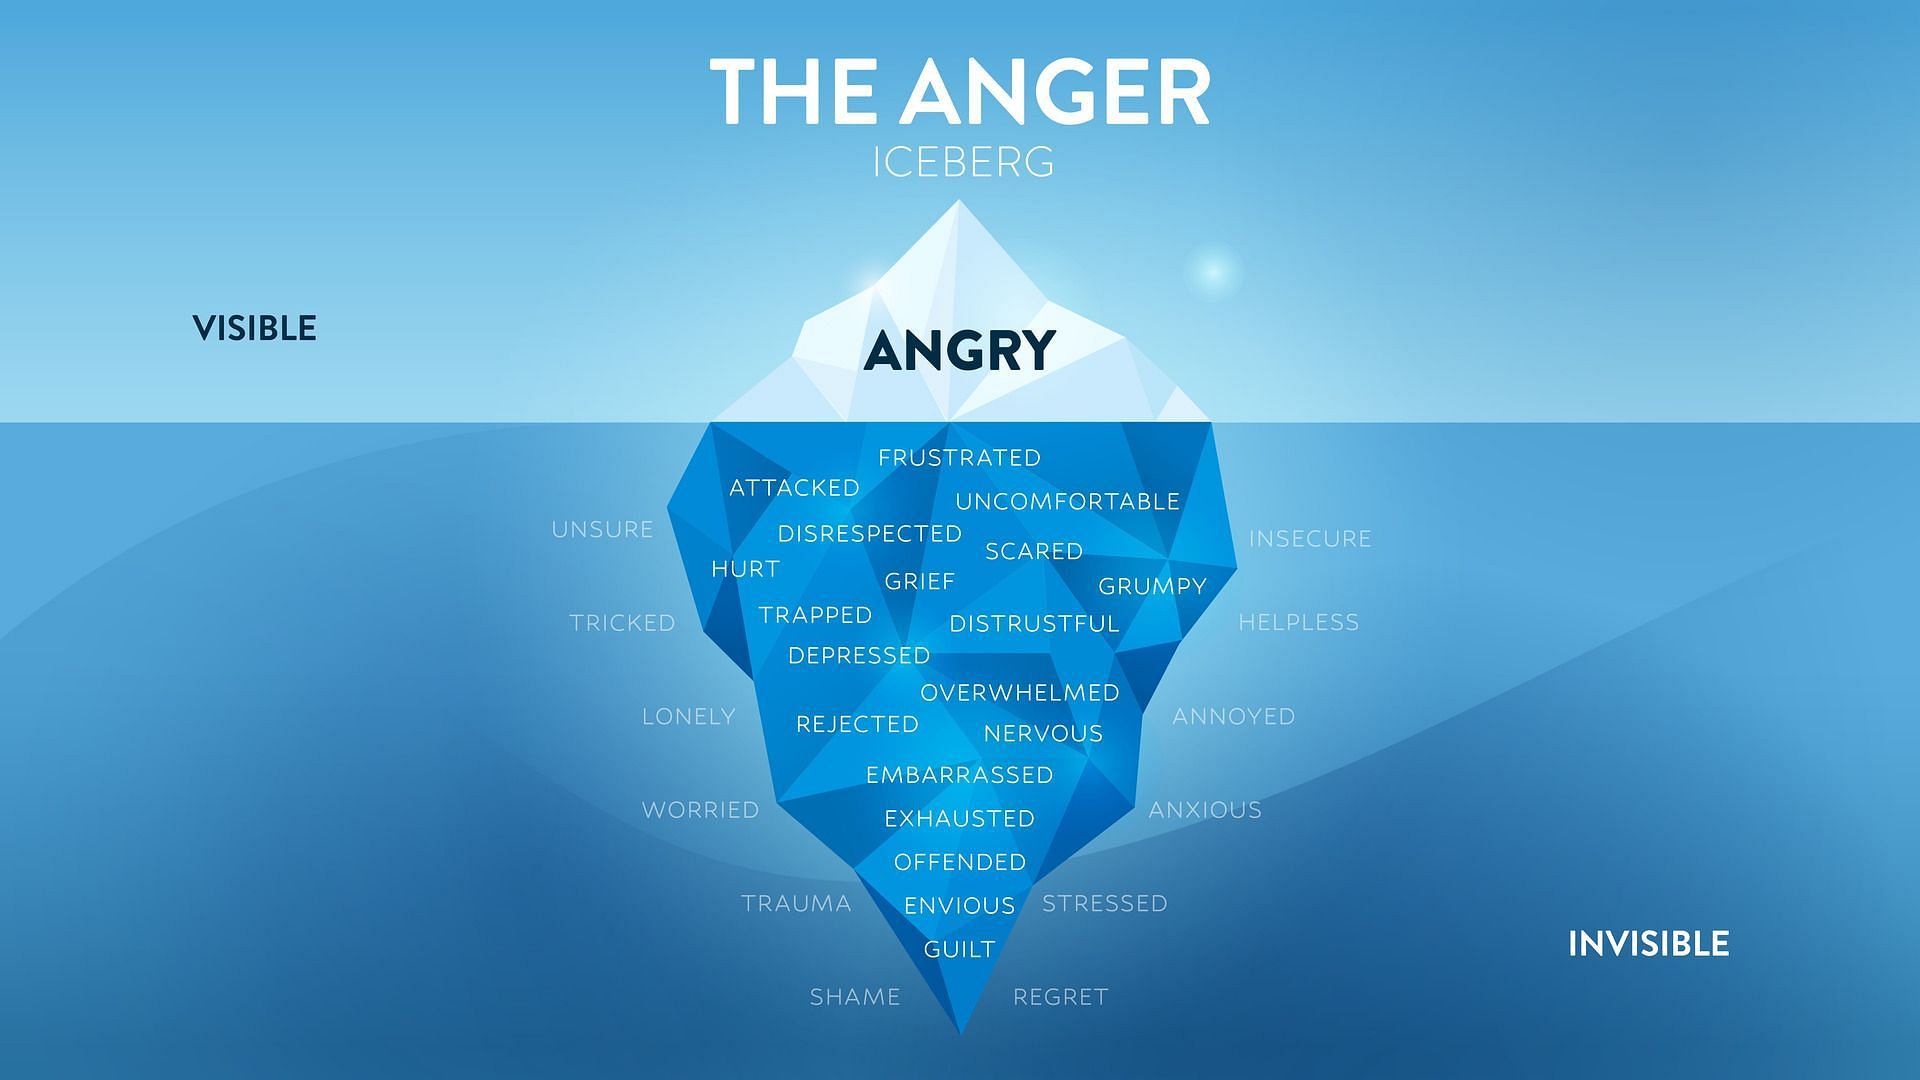 There is so much more to anger that we don&#039;t see. (Image via Vecteezy/Chavapong Prateep Na Thalang)